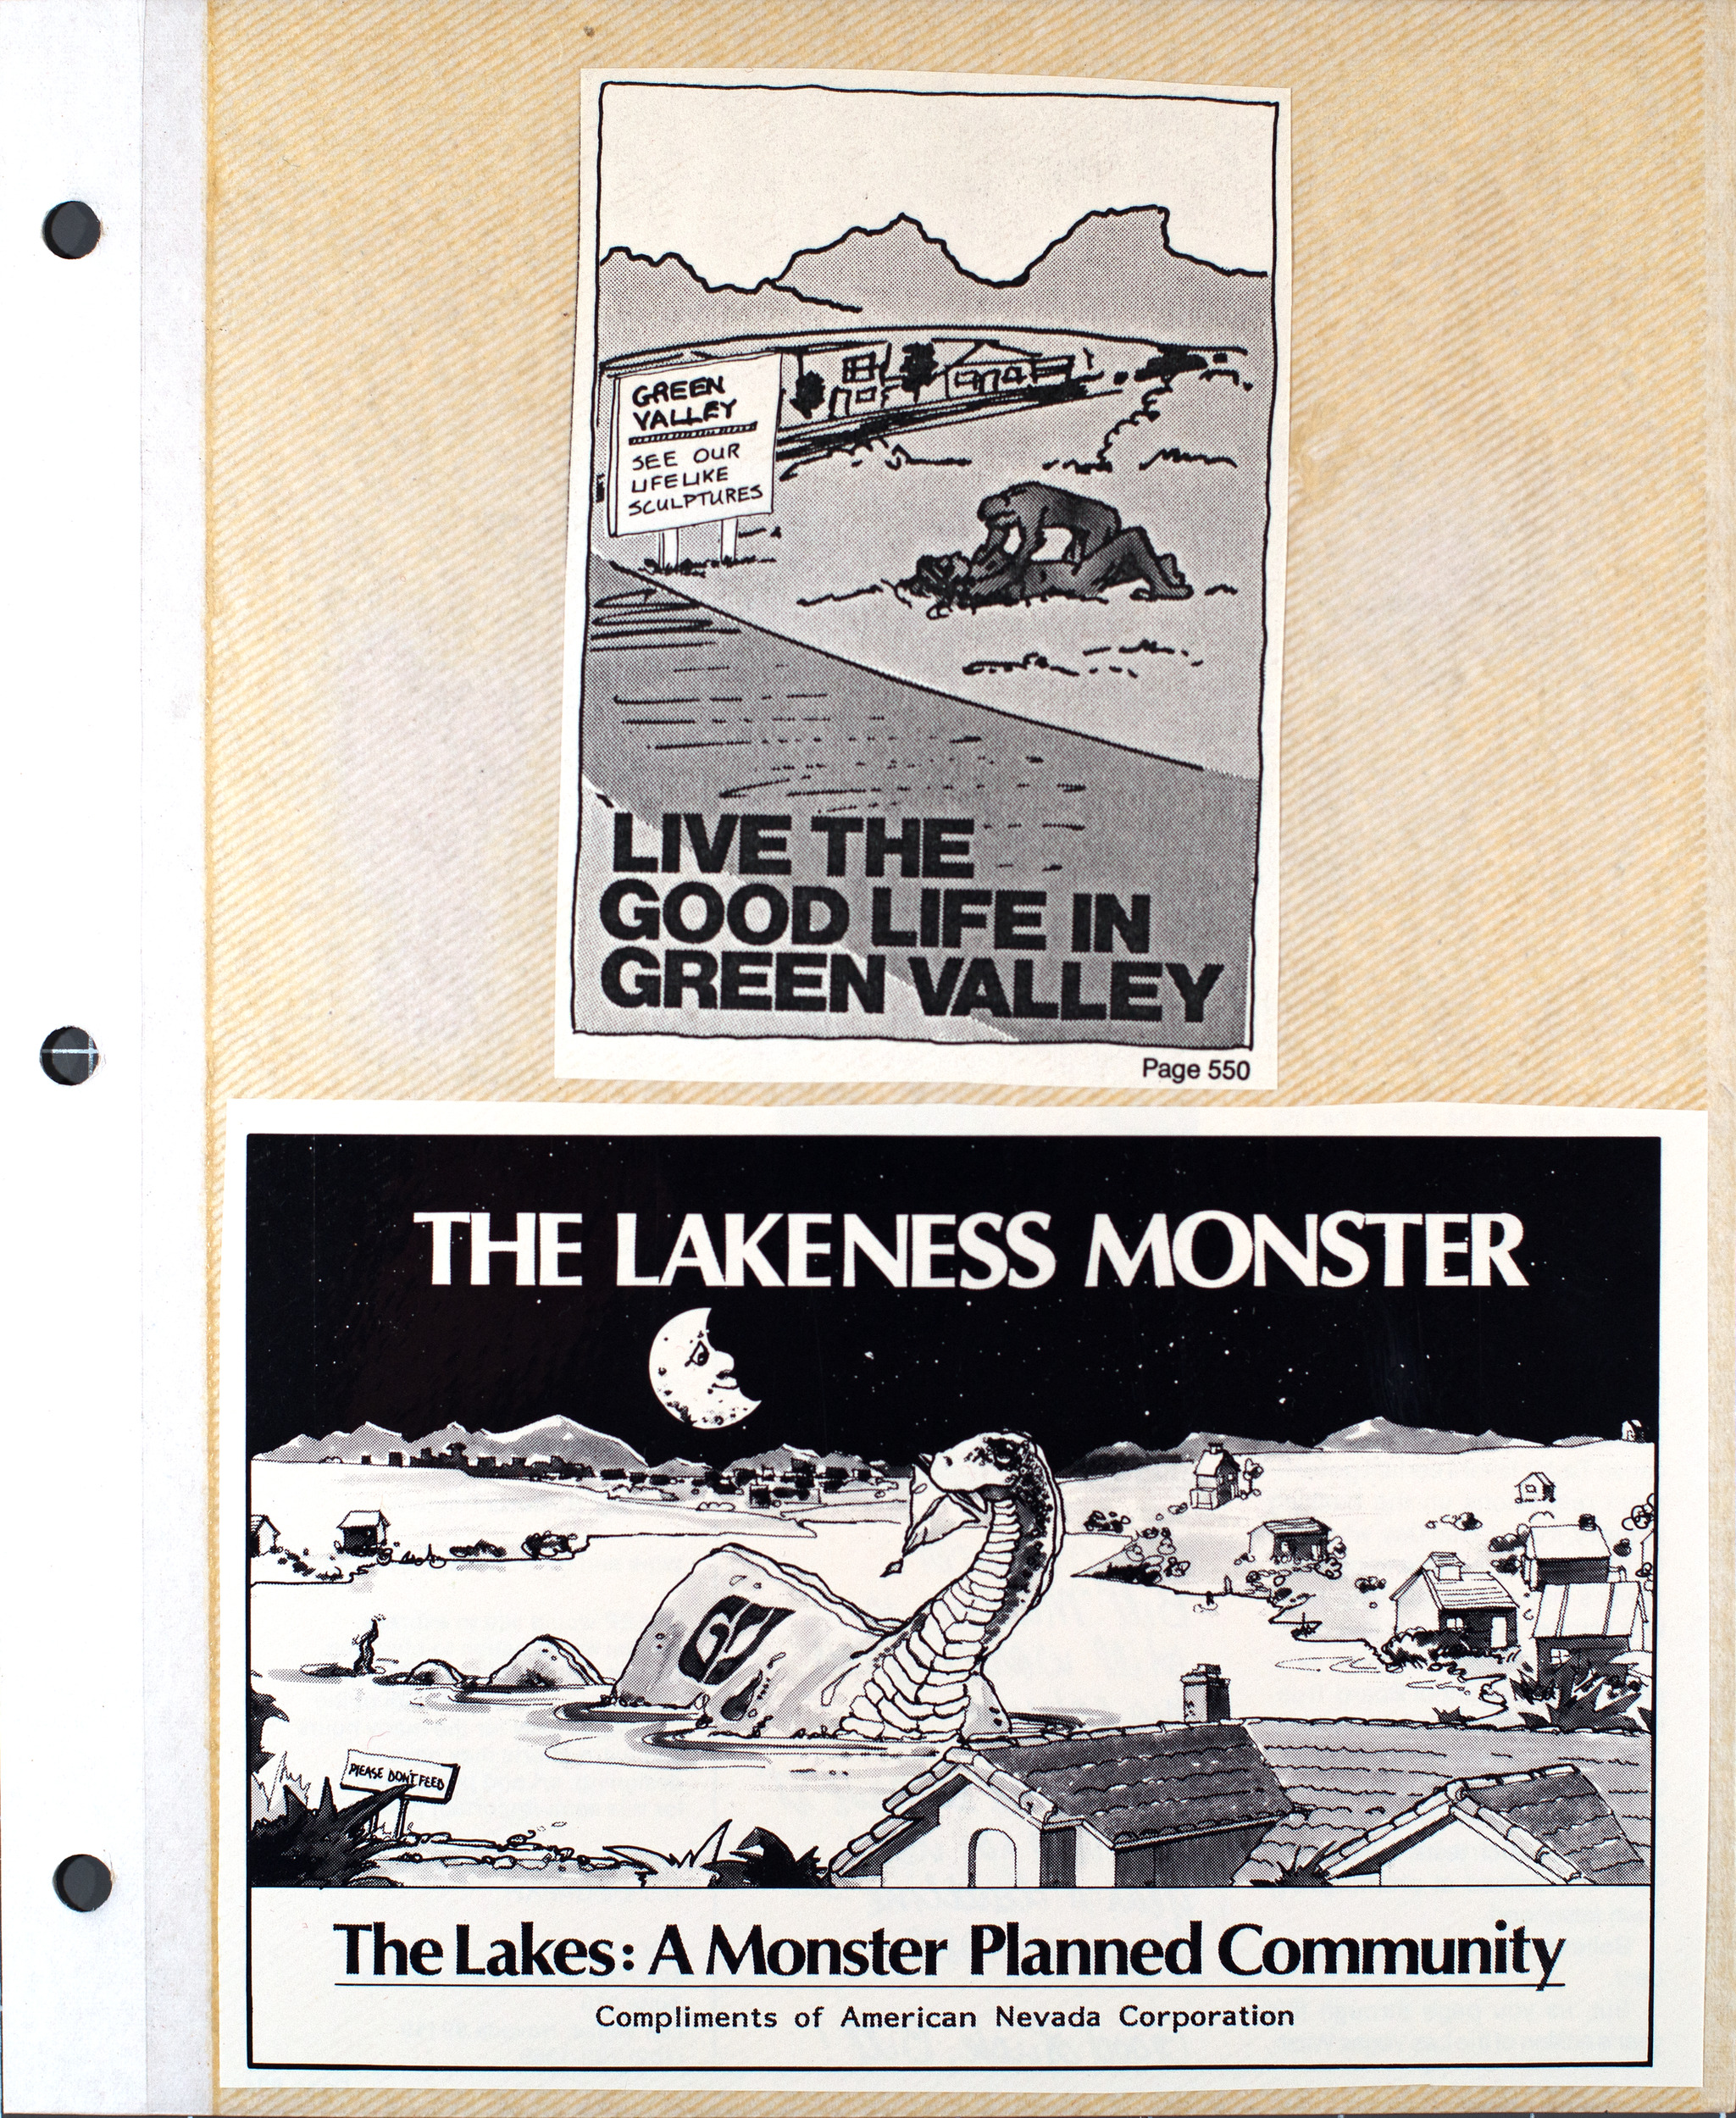 Advertising cards for Green Valley and the Lakes developments